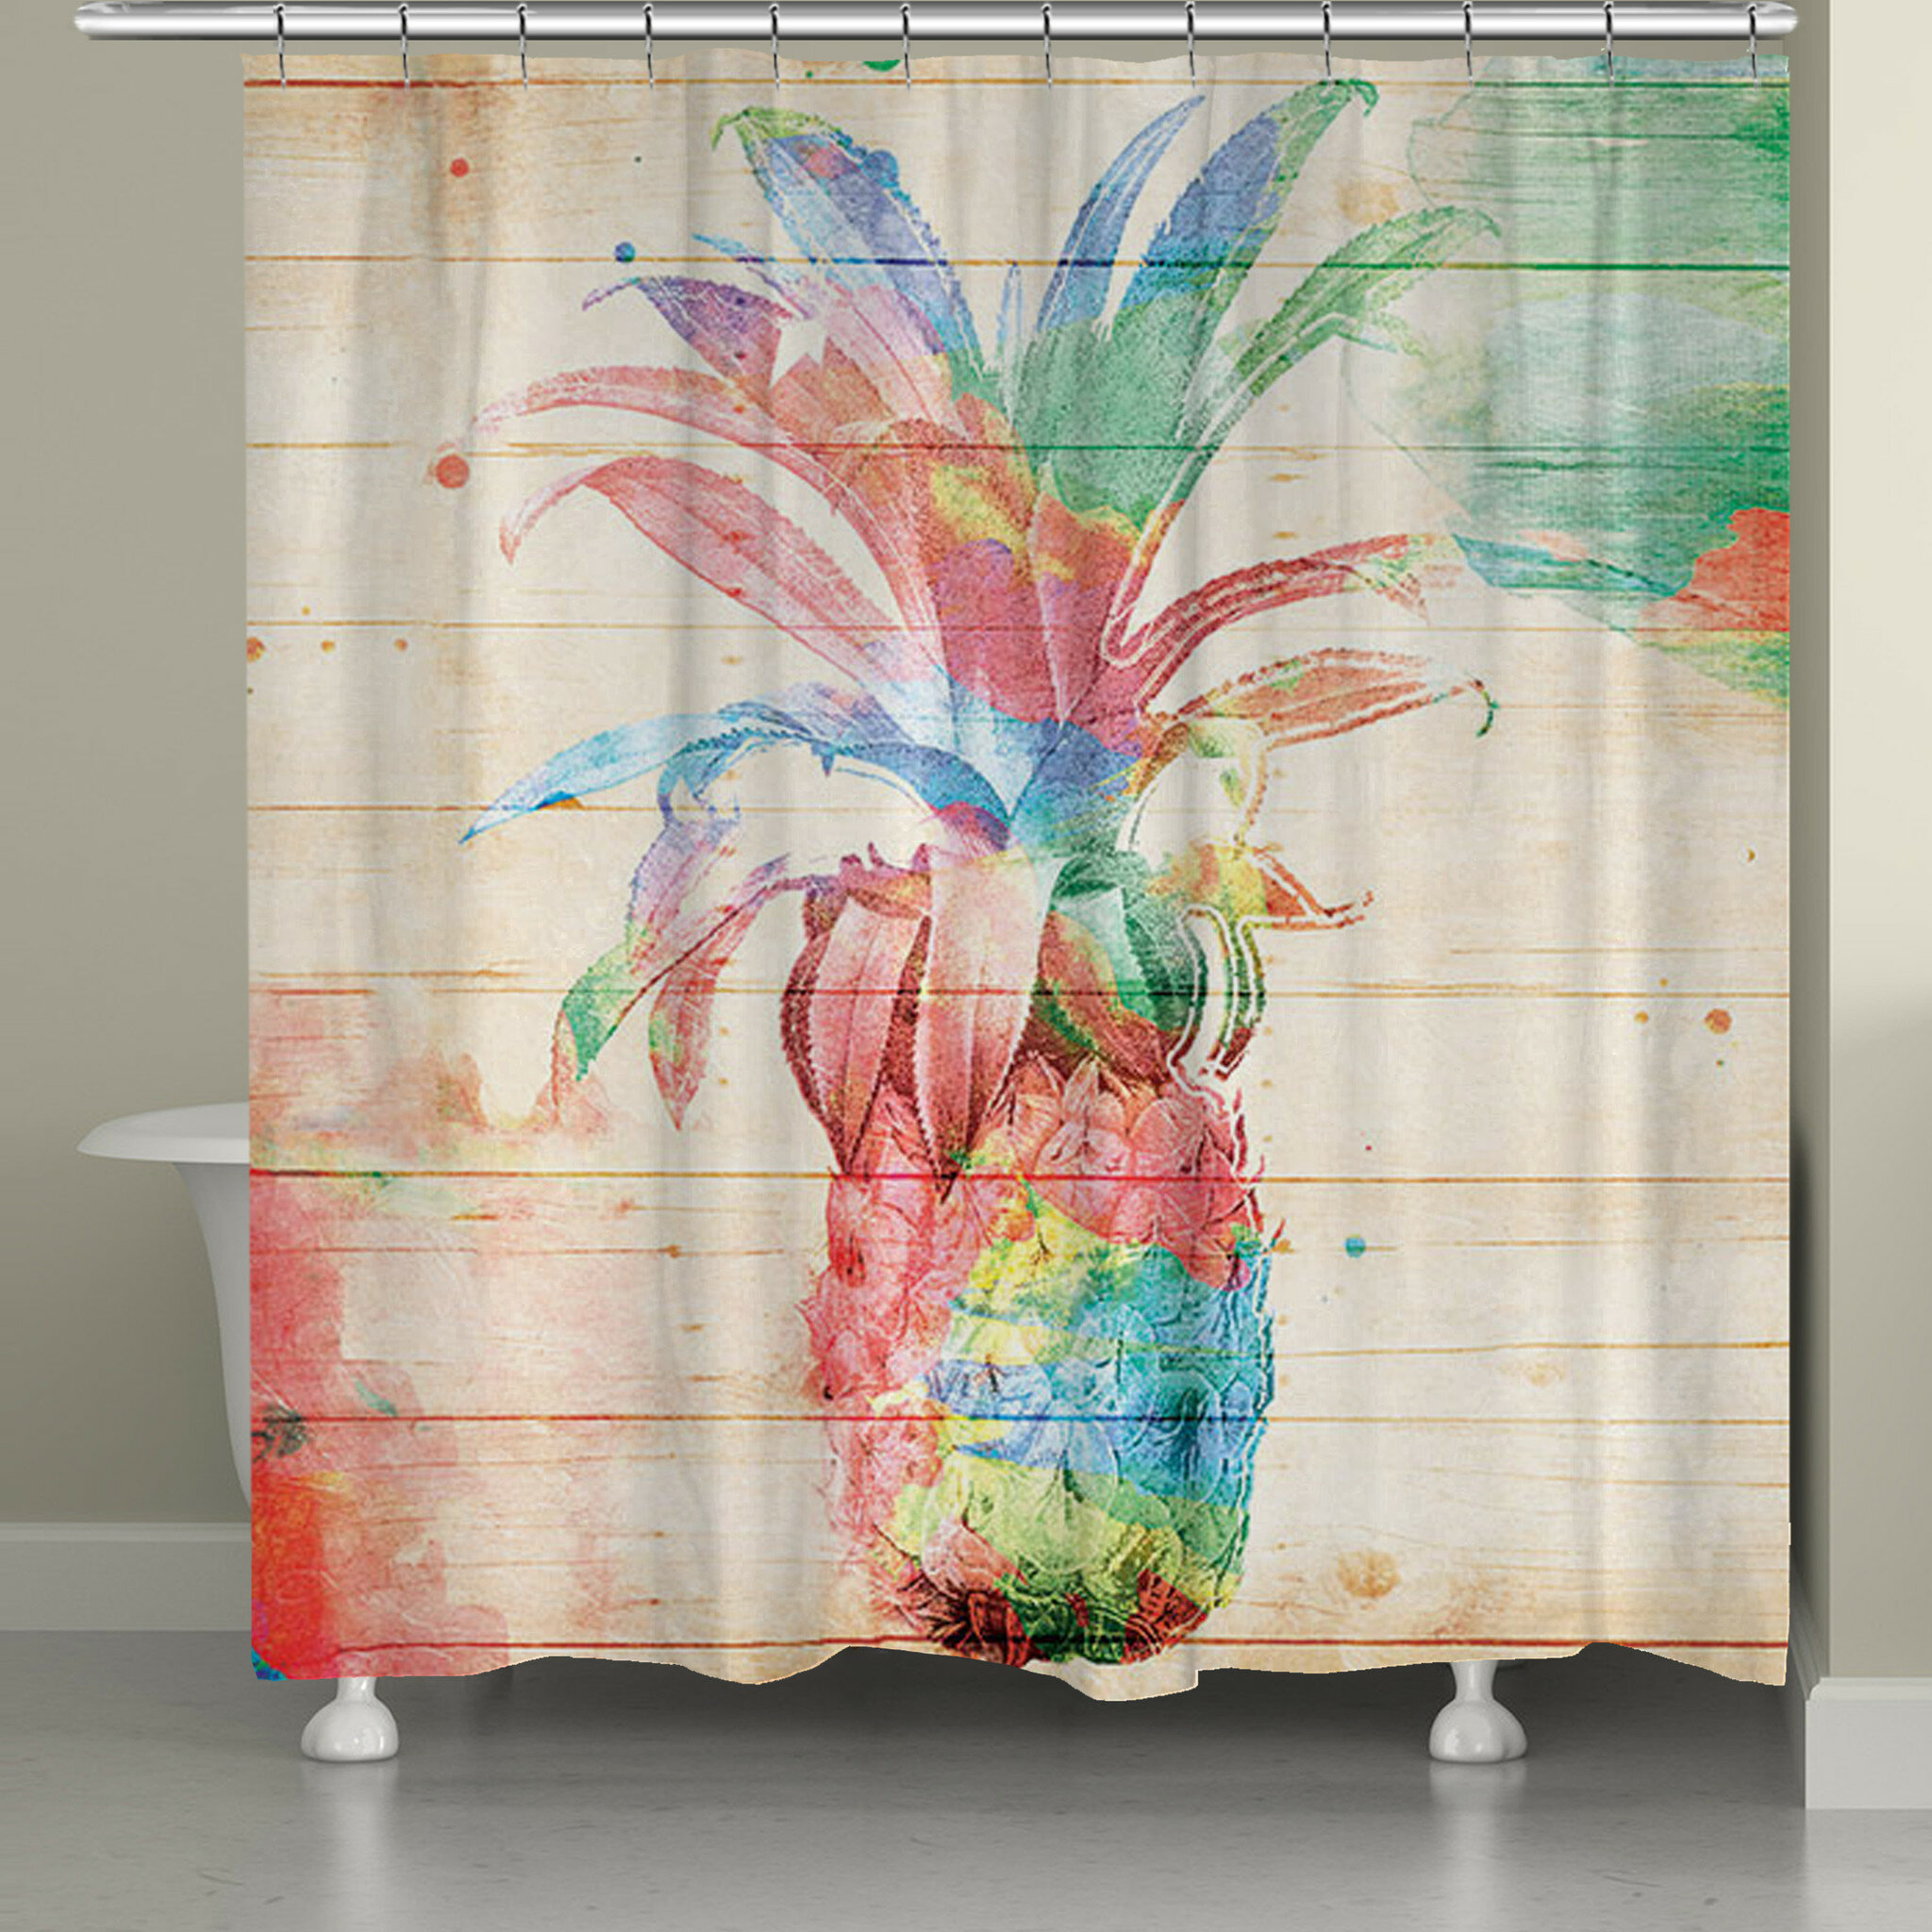 colorful shower curtains